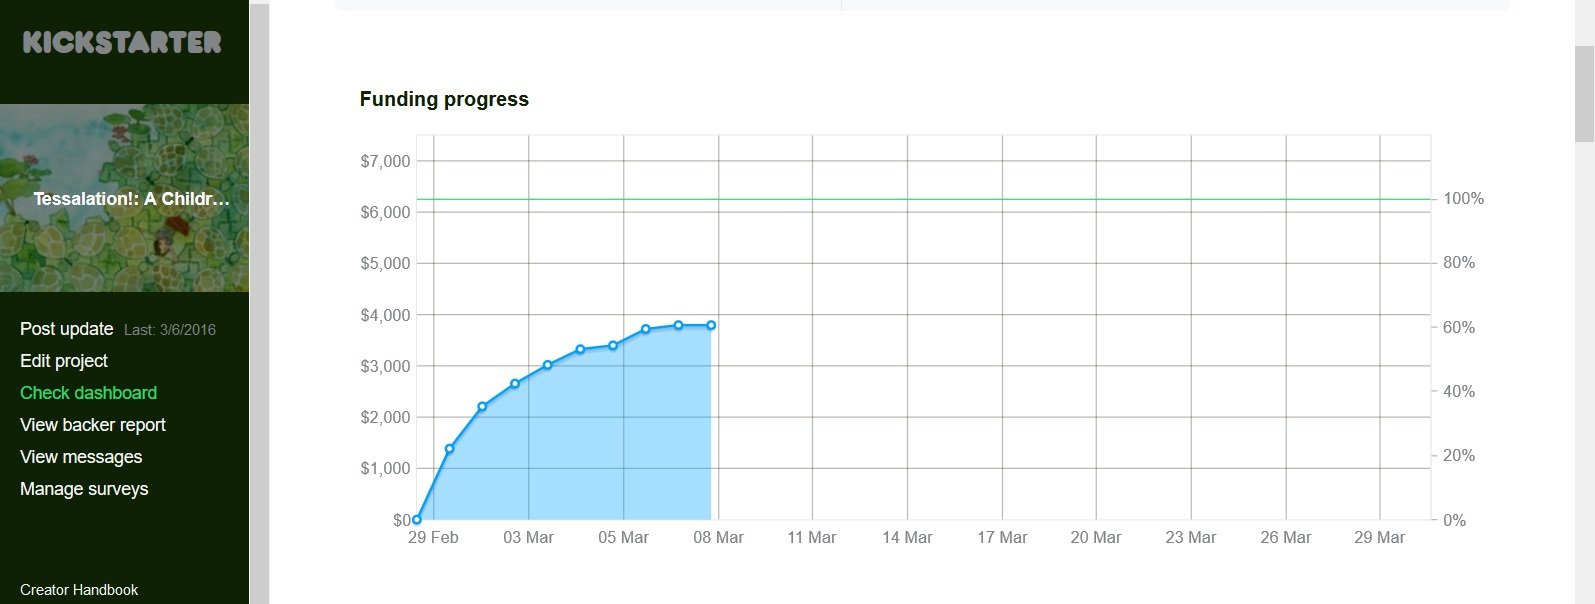 A graph showing progress on the Kickstarter campaign for Tessalation!